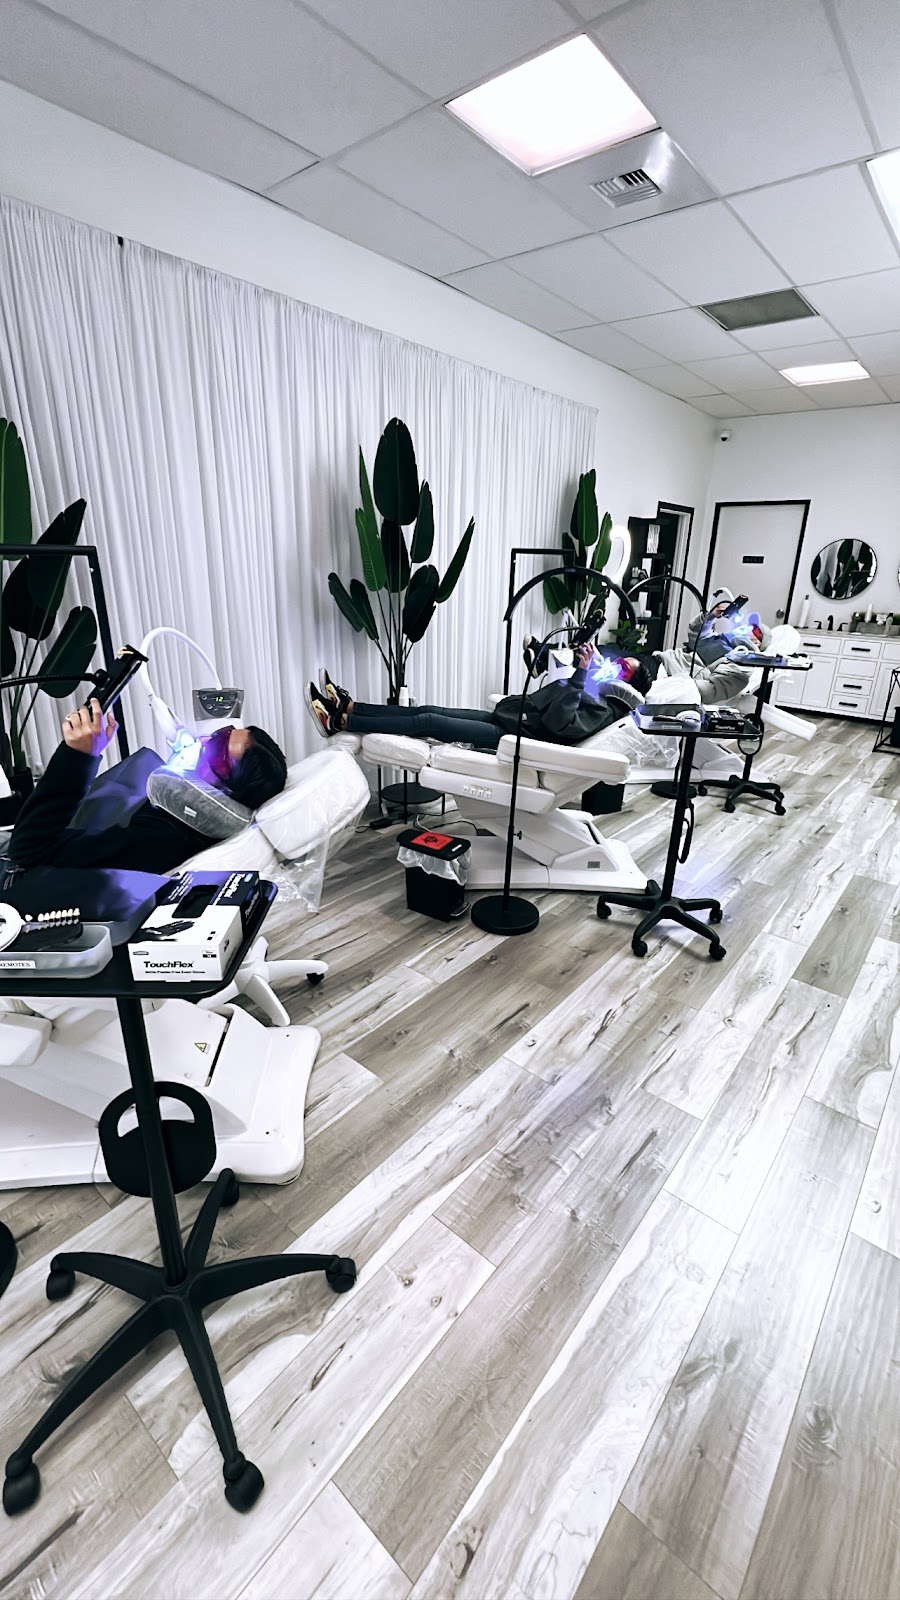 The Coco Blanc Teeth Whitening | 7205 Greenleaf Ave SUITE B, Whittier, CA 90602, USA | Phone: (626) 606-0712